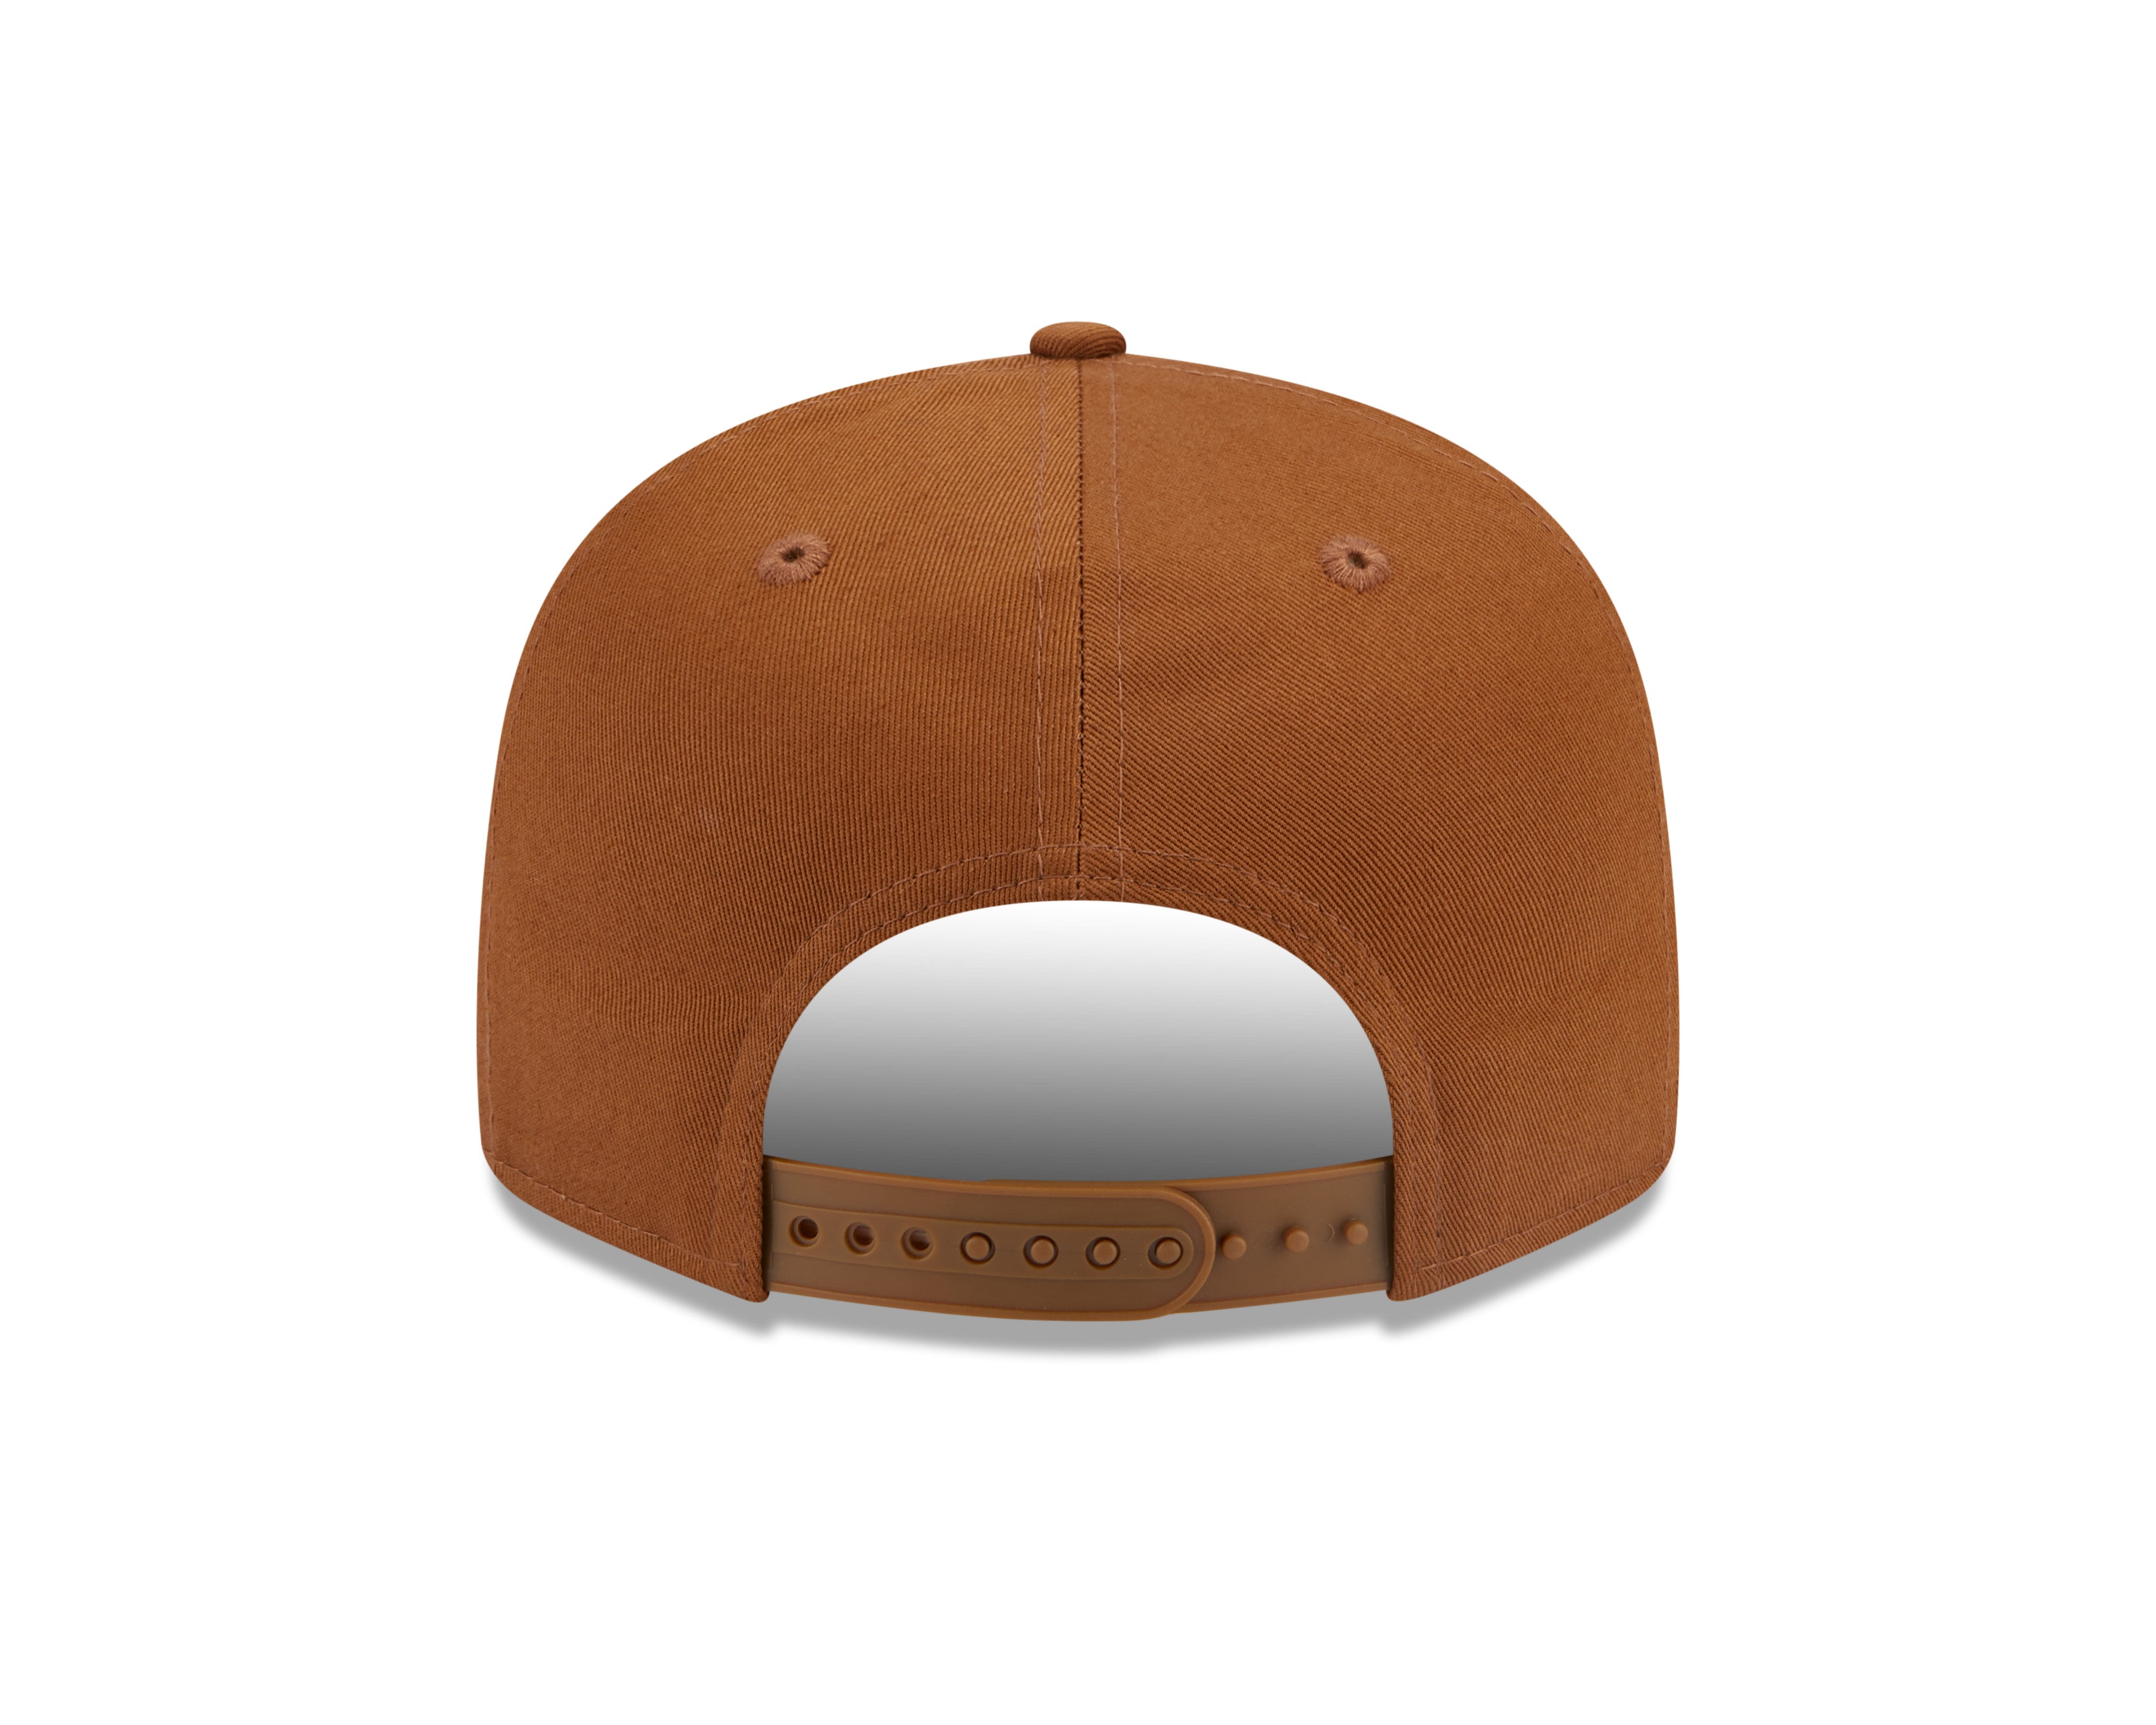 New Era 9Fifty Side Patch Detroit Tigers - Brown - Headz Up 